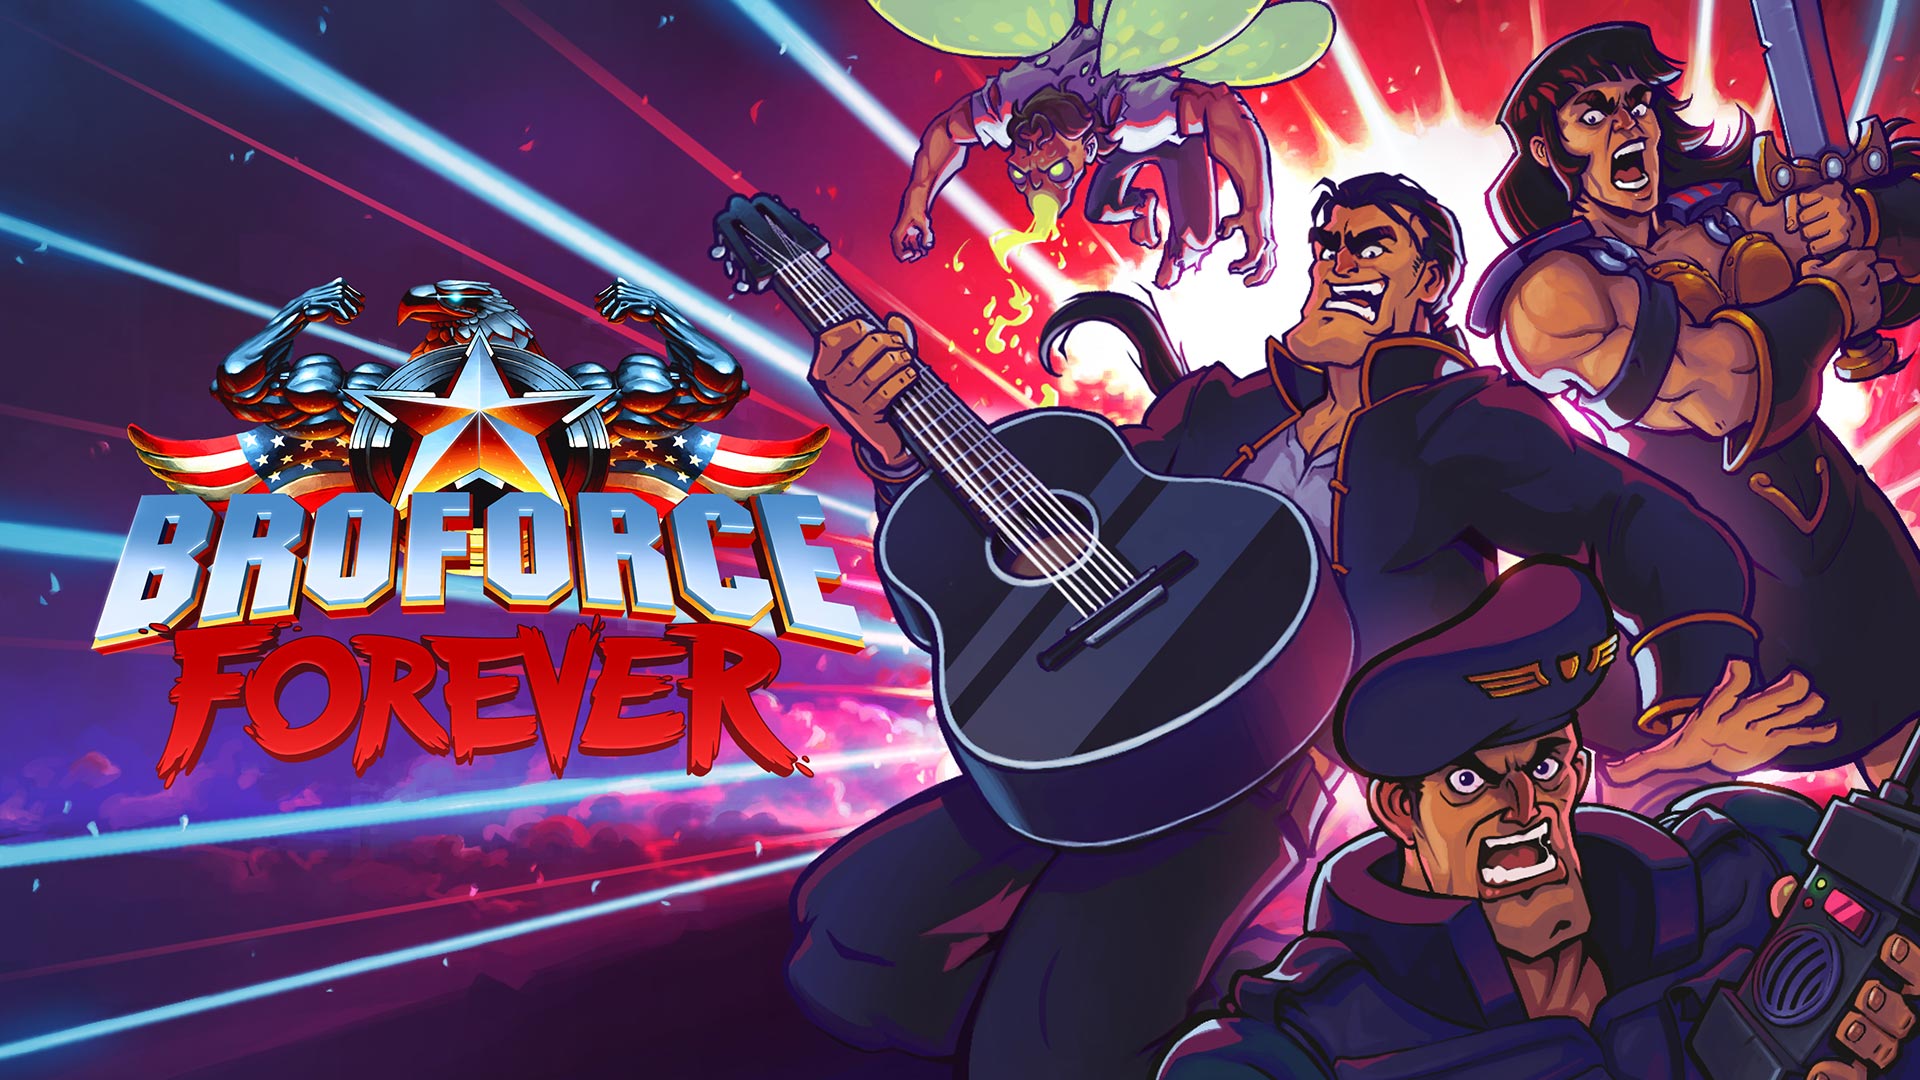 Meet Broforce Forever’s Outrageous New Playable Heroes